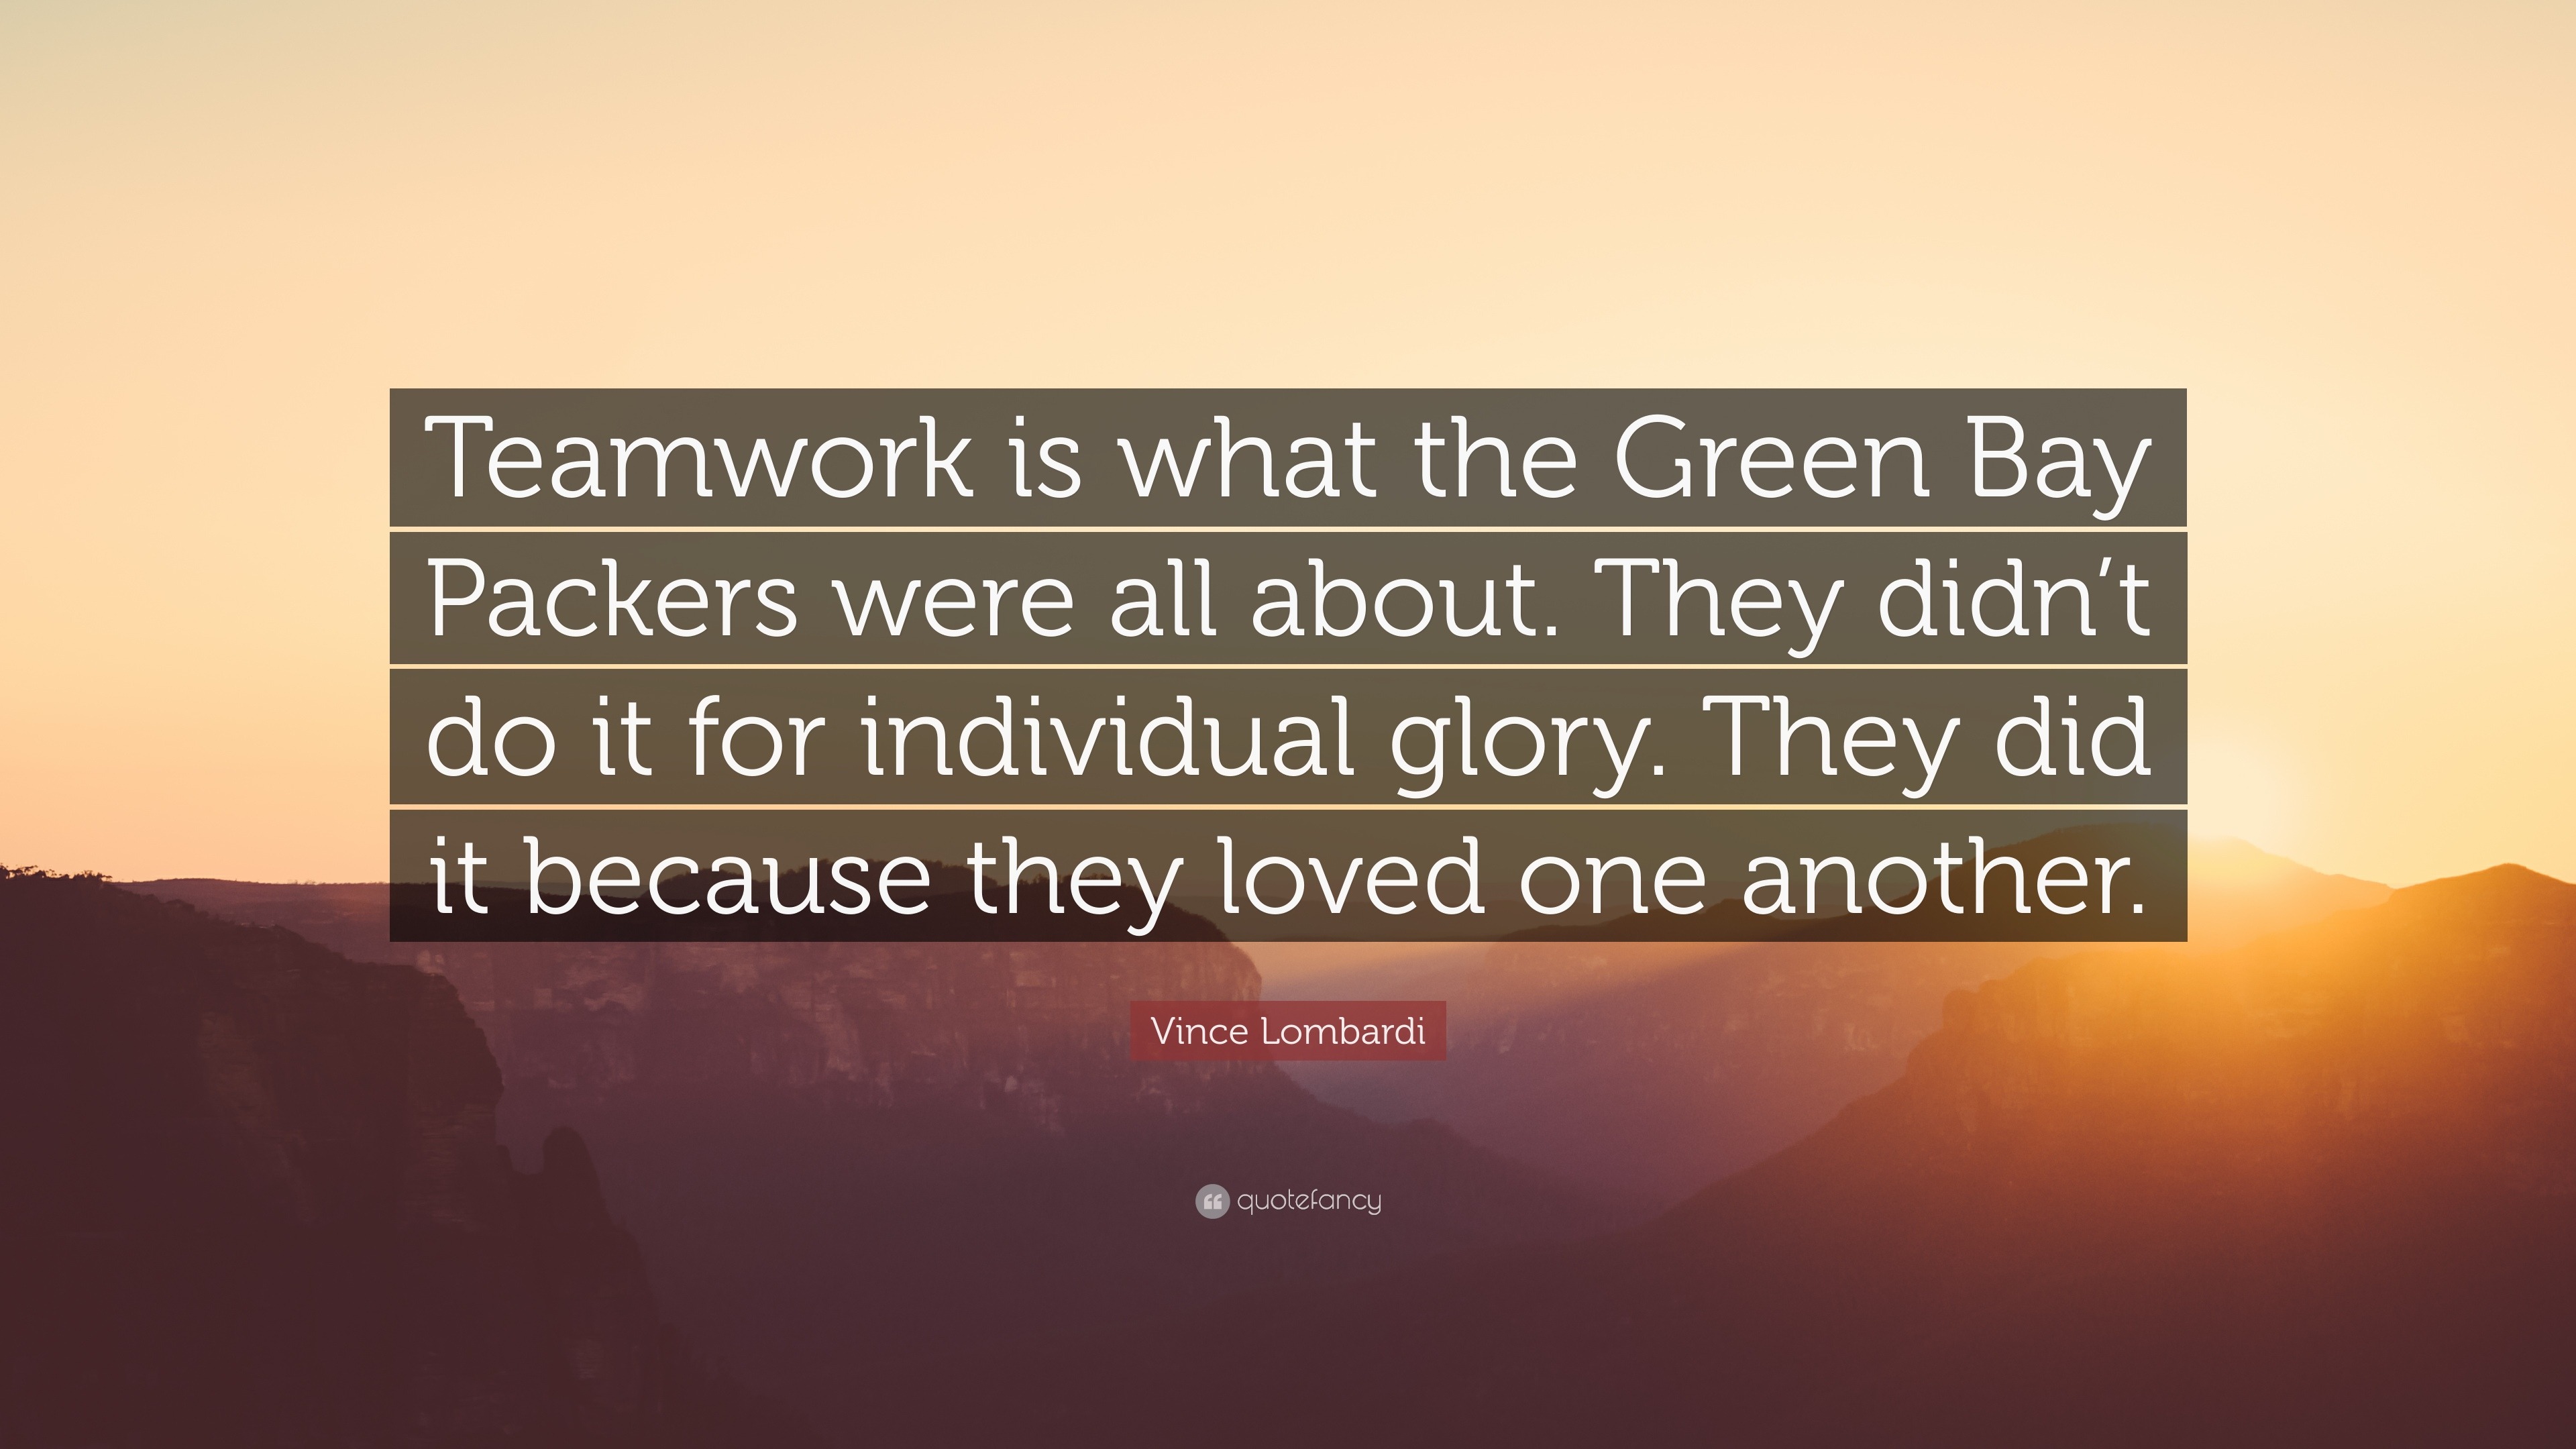 Vince Lombardi Quote: “Teamwork is what the Green Bay Packers were all ...